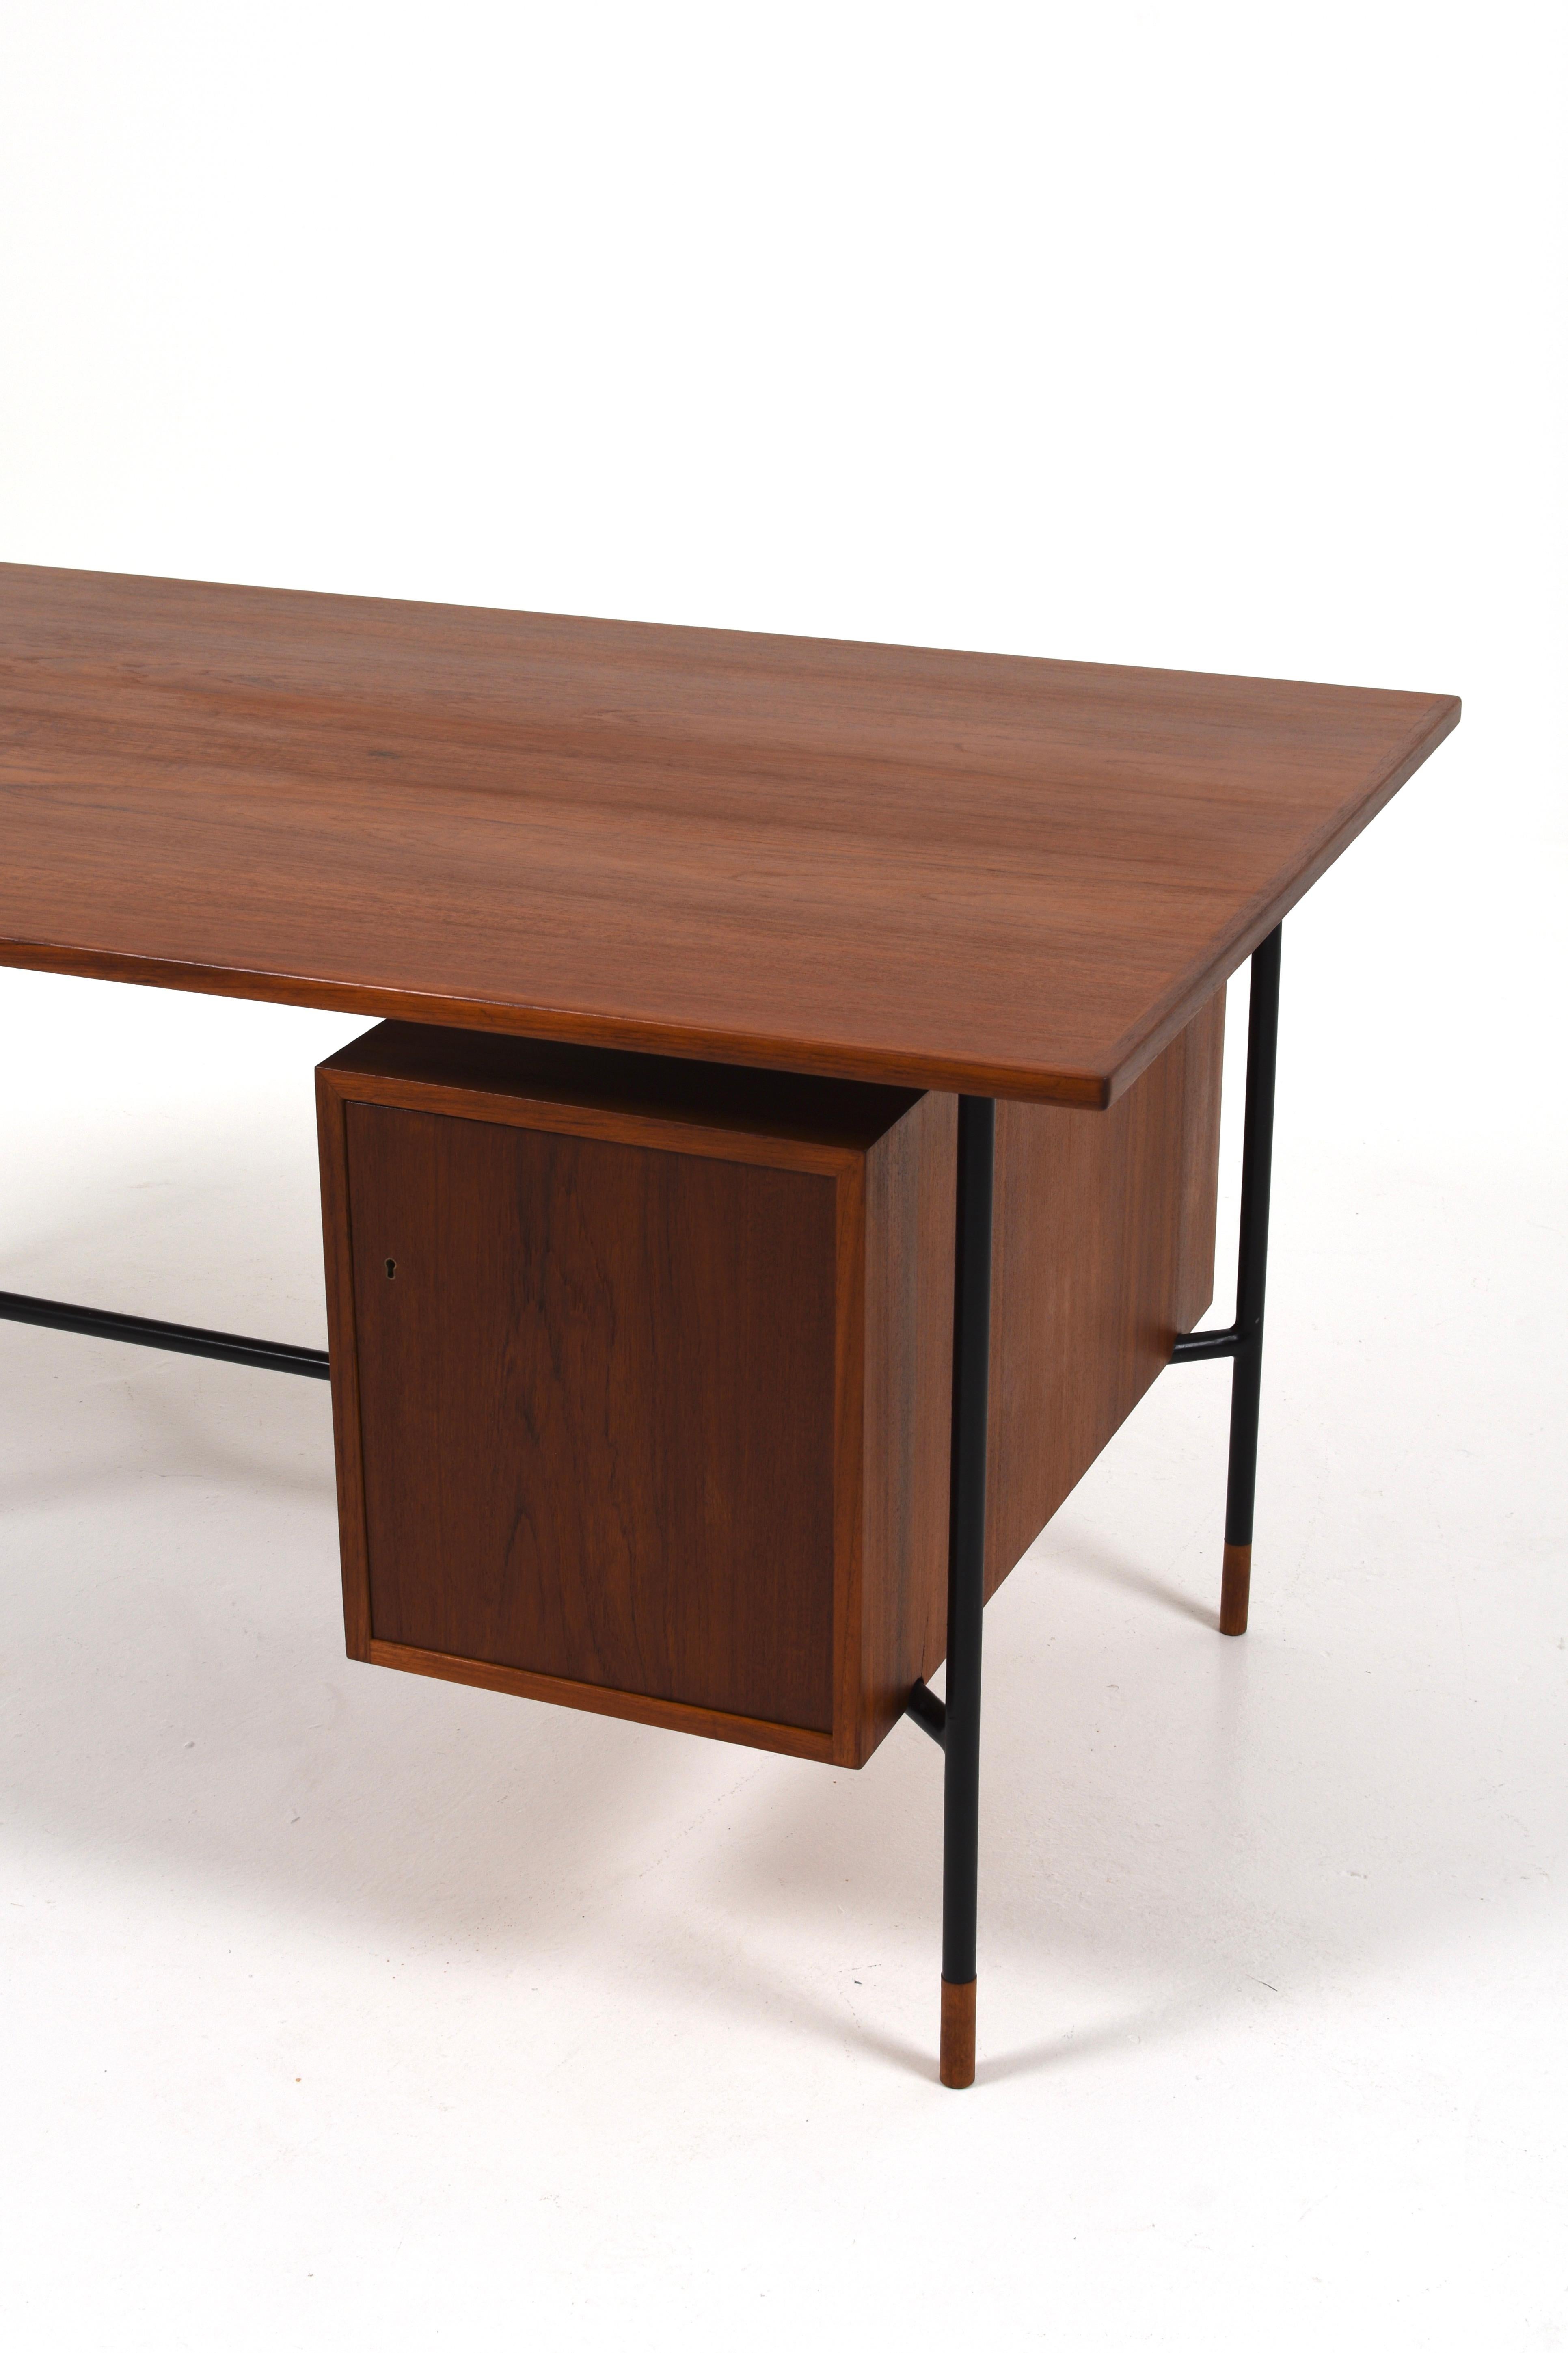 Rare Desk H-55 by Åke Hassbjer in teak and steel base, 1950s For Sale 4